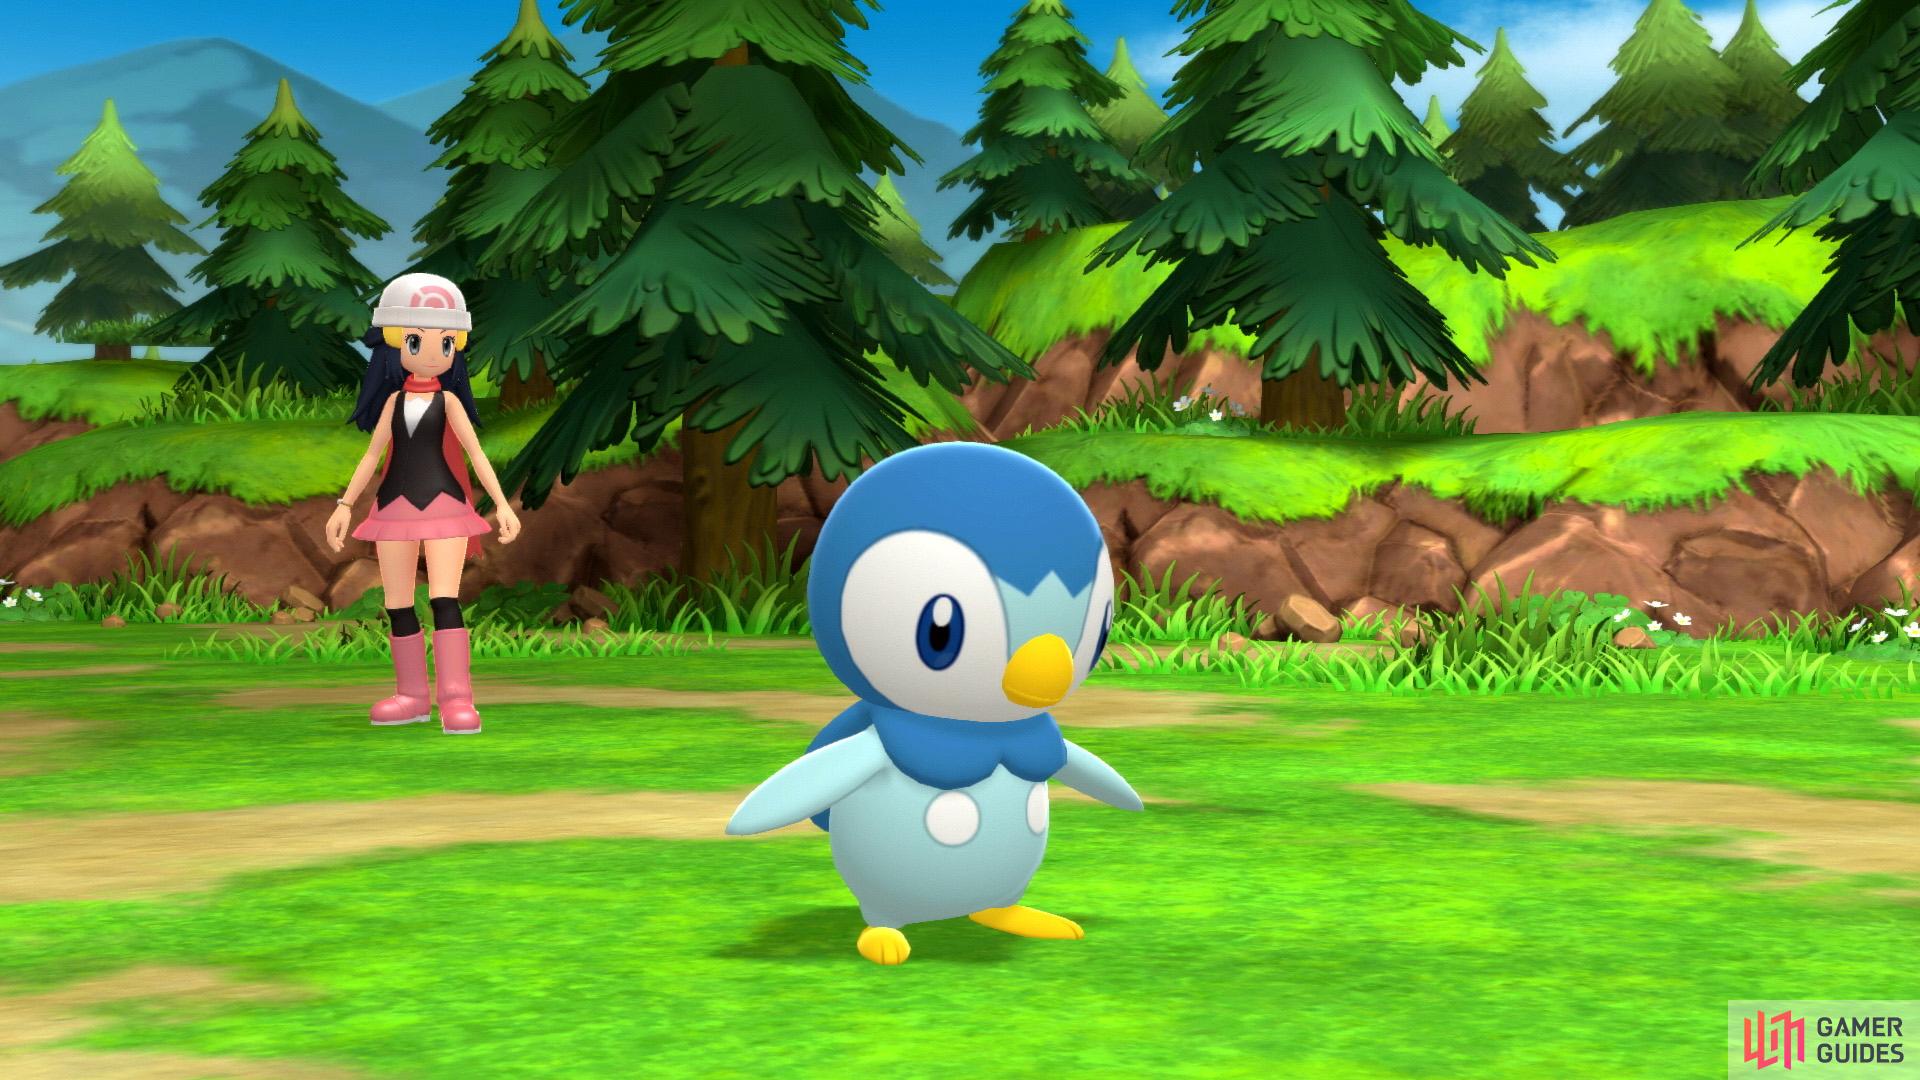 Piplup is more balanced compared to the other two.